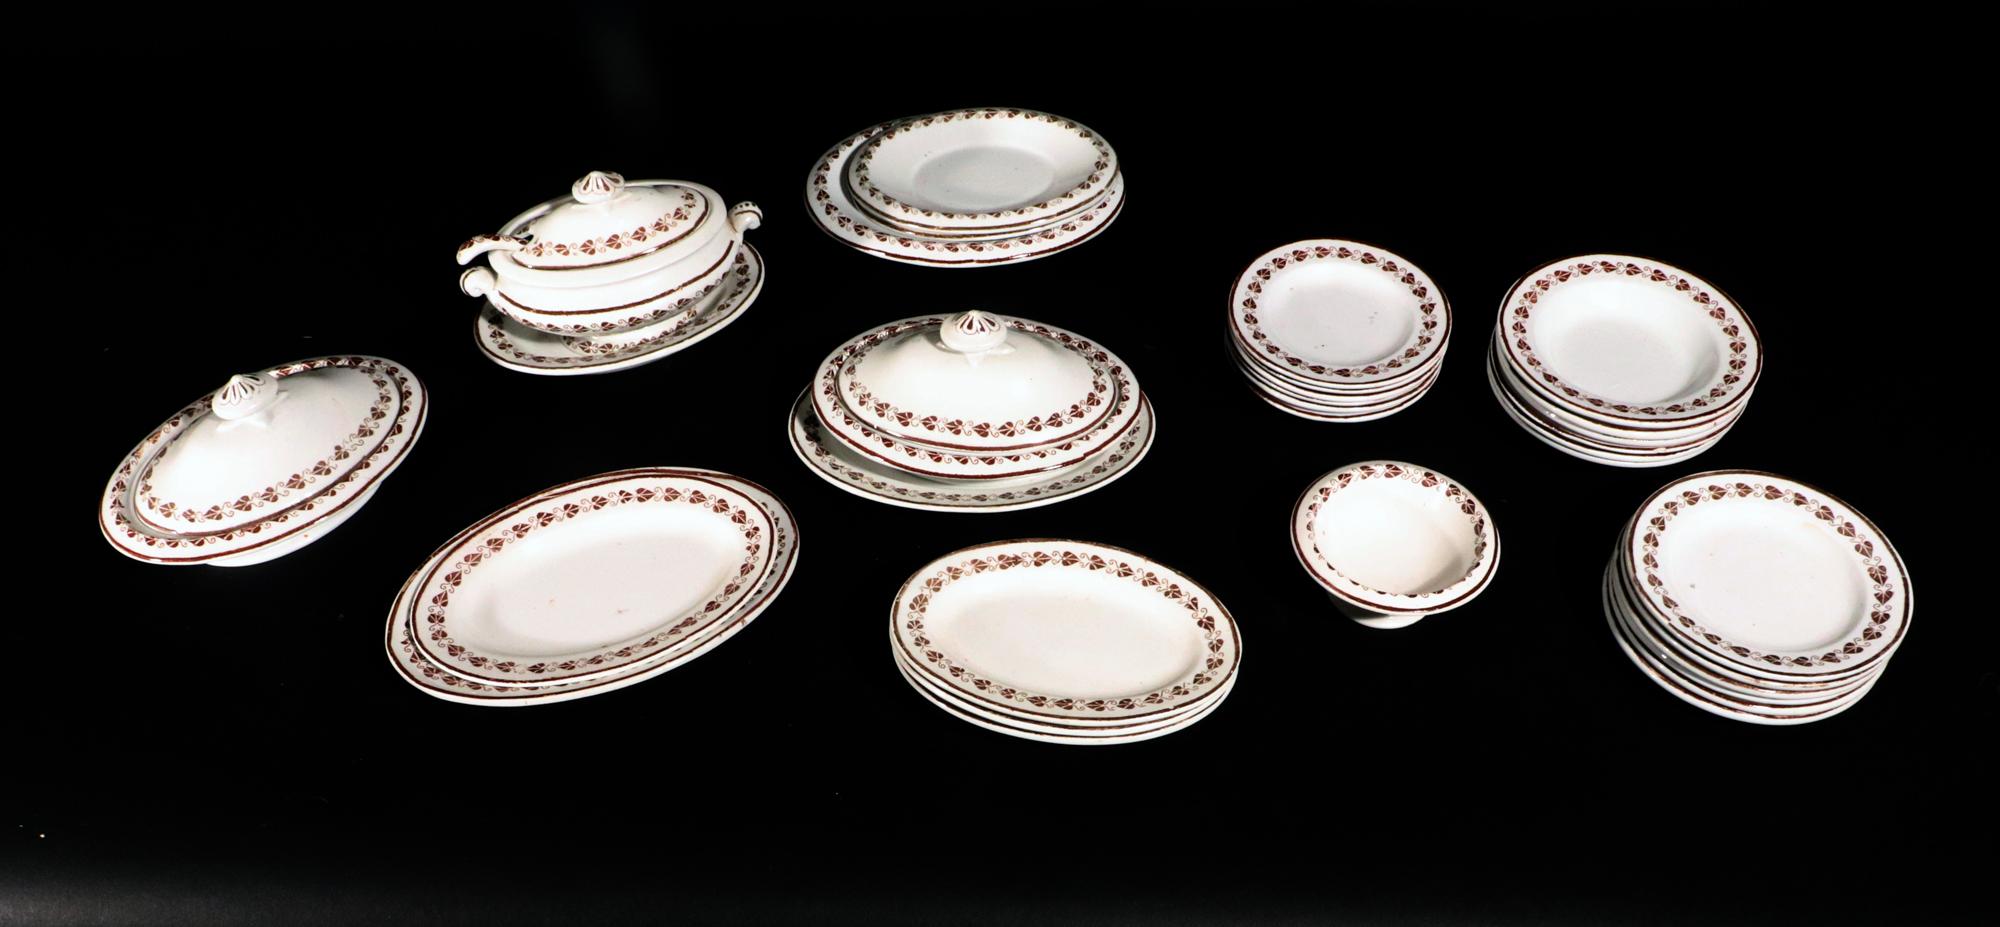 Copeland Pottery Miniature Child's Dinner Set,
1847-90

The Copeland pottery miniature child's dinner set consists of 29 pieces.  It has a creamy color ground with a band of puce leaves around the rim.

The service has a soup tureen, cover, stand,